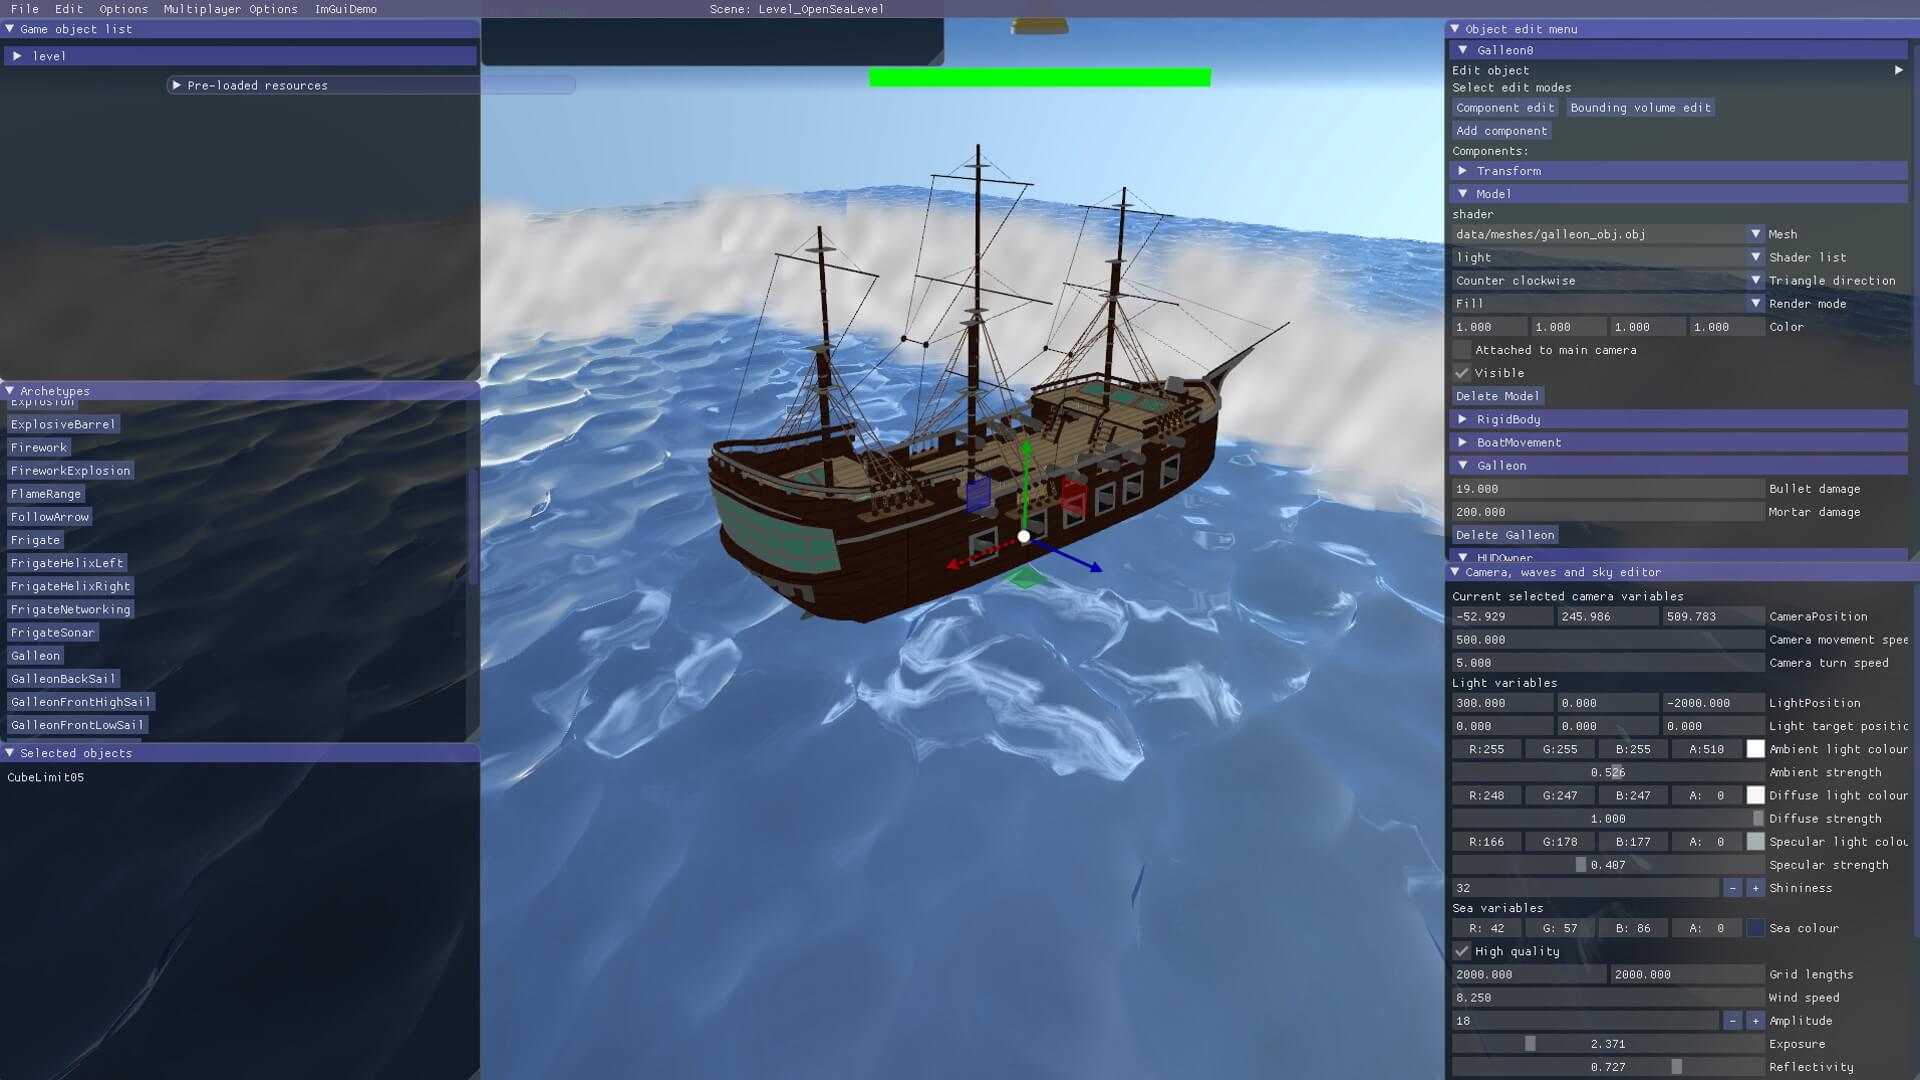 Screenshot of a 3D pirate ship being manipulated inside a game engine scene editor